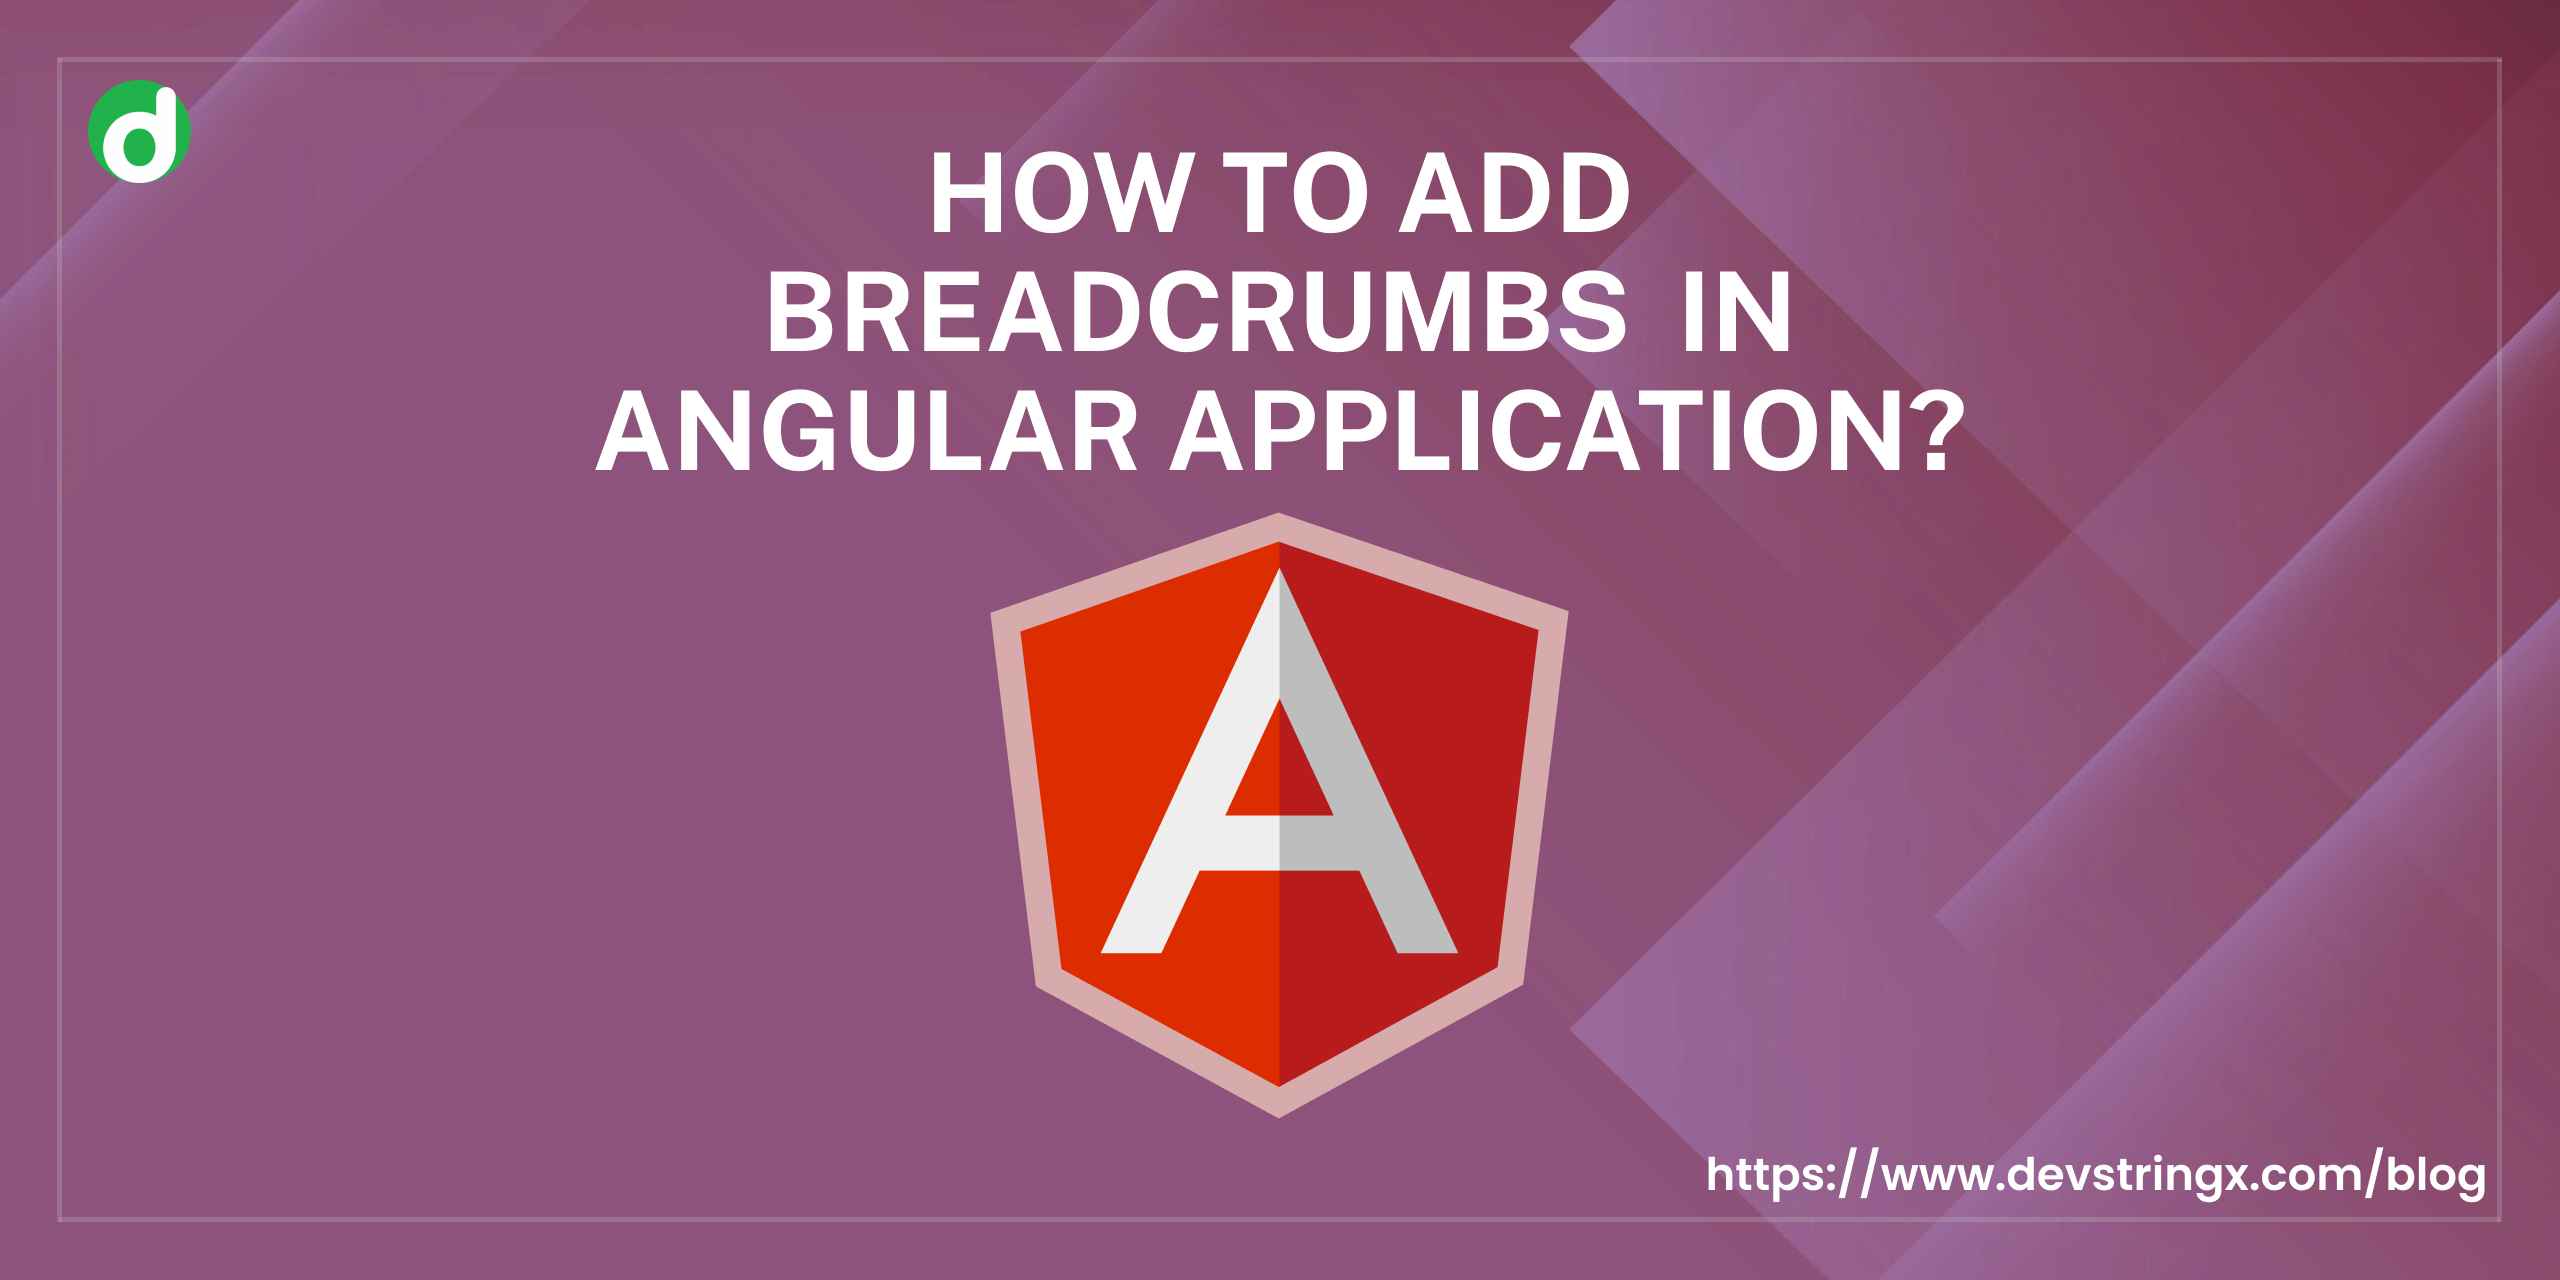 Feature image to add breadcrumbs in angular app